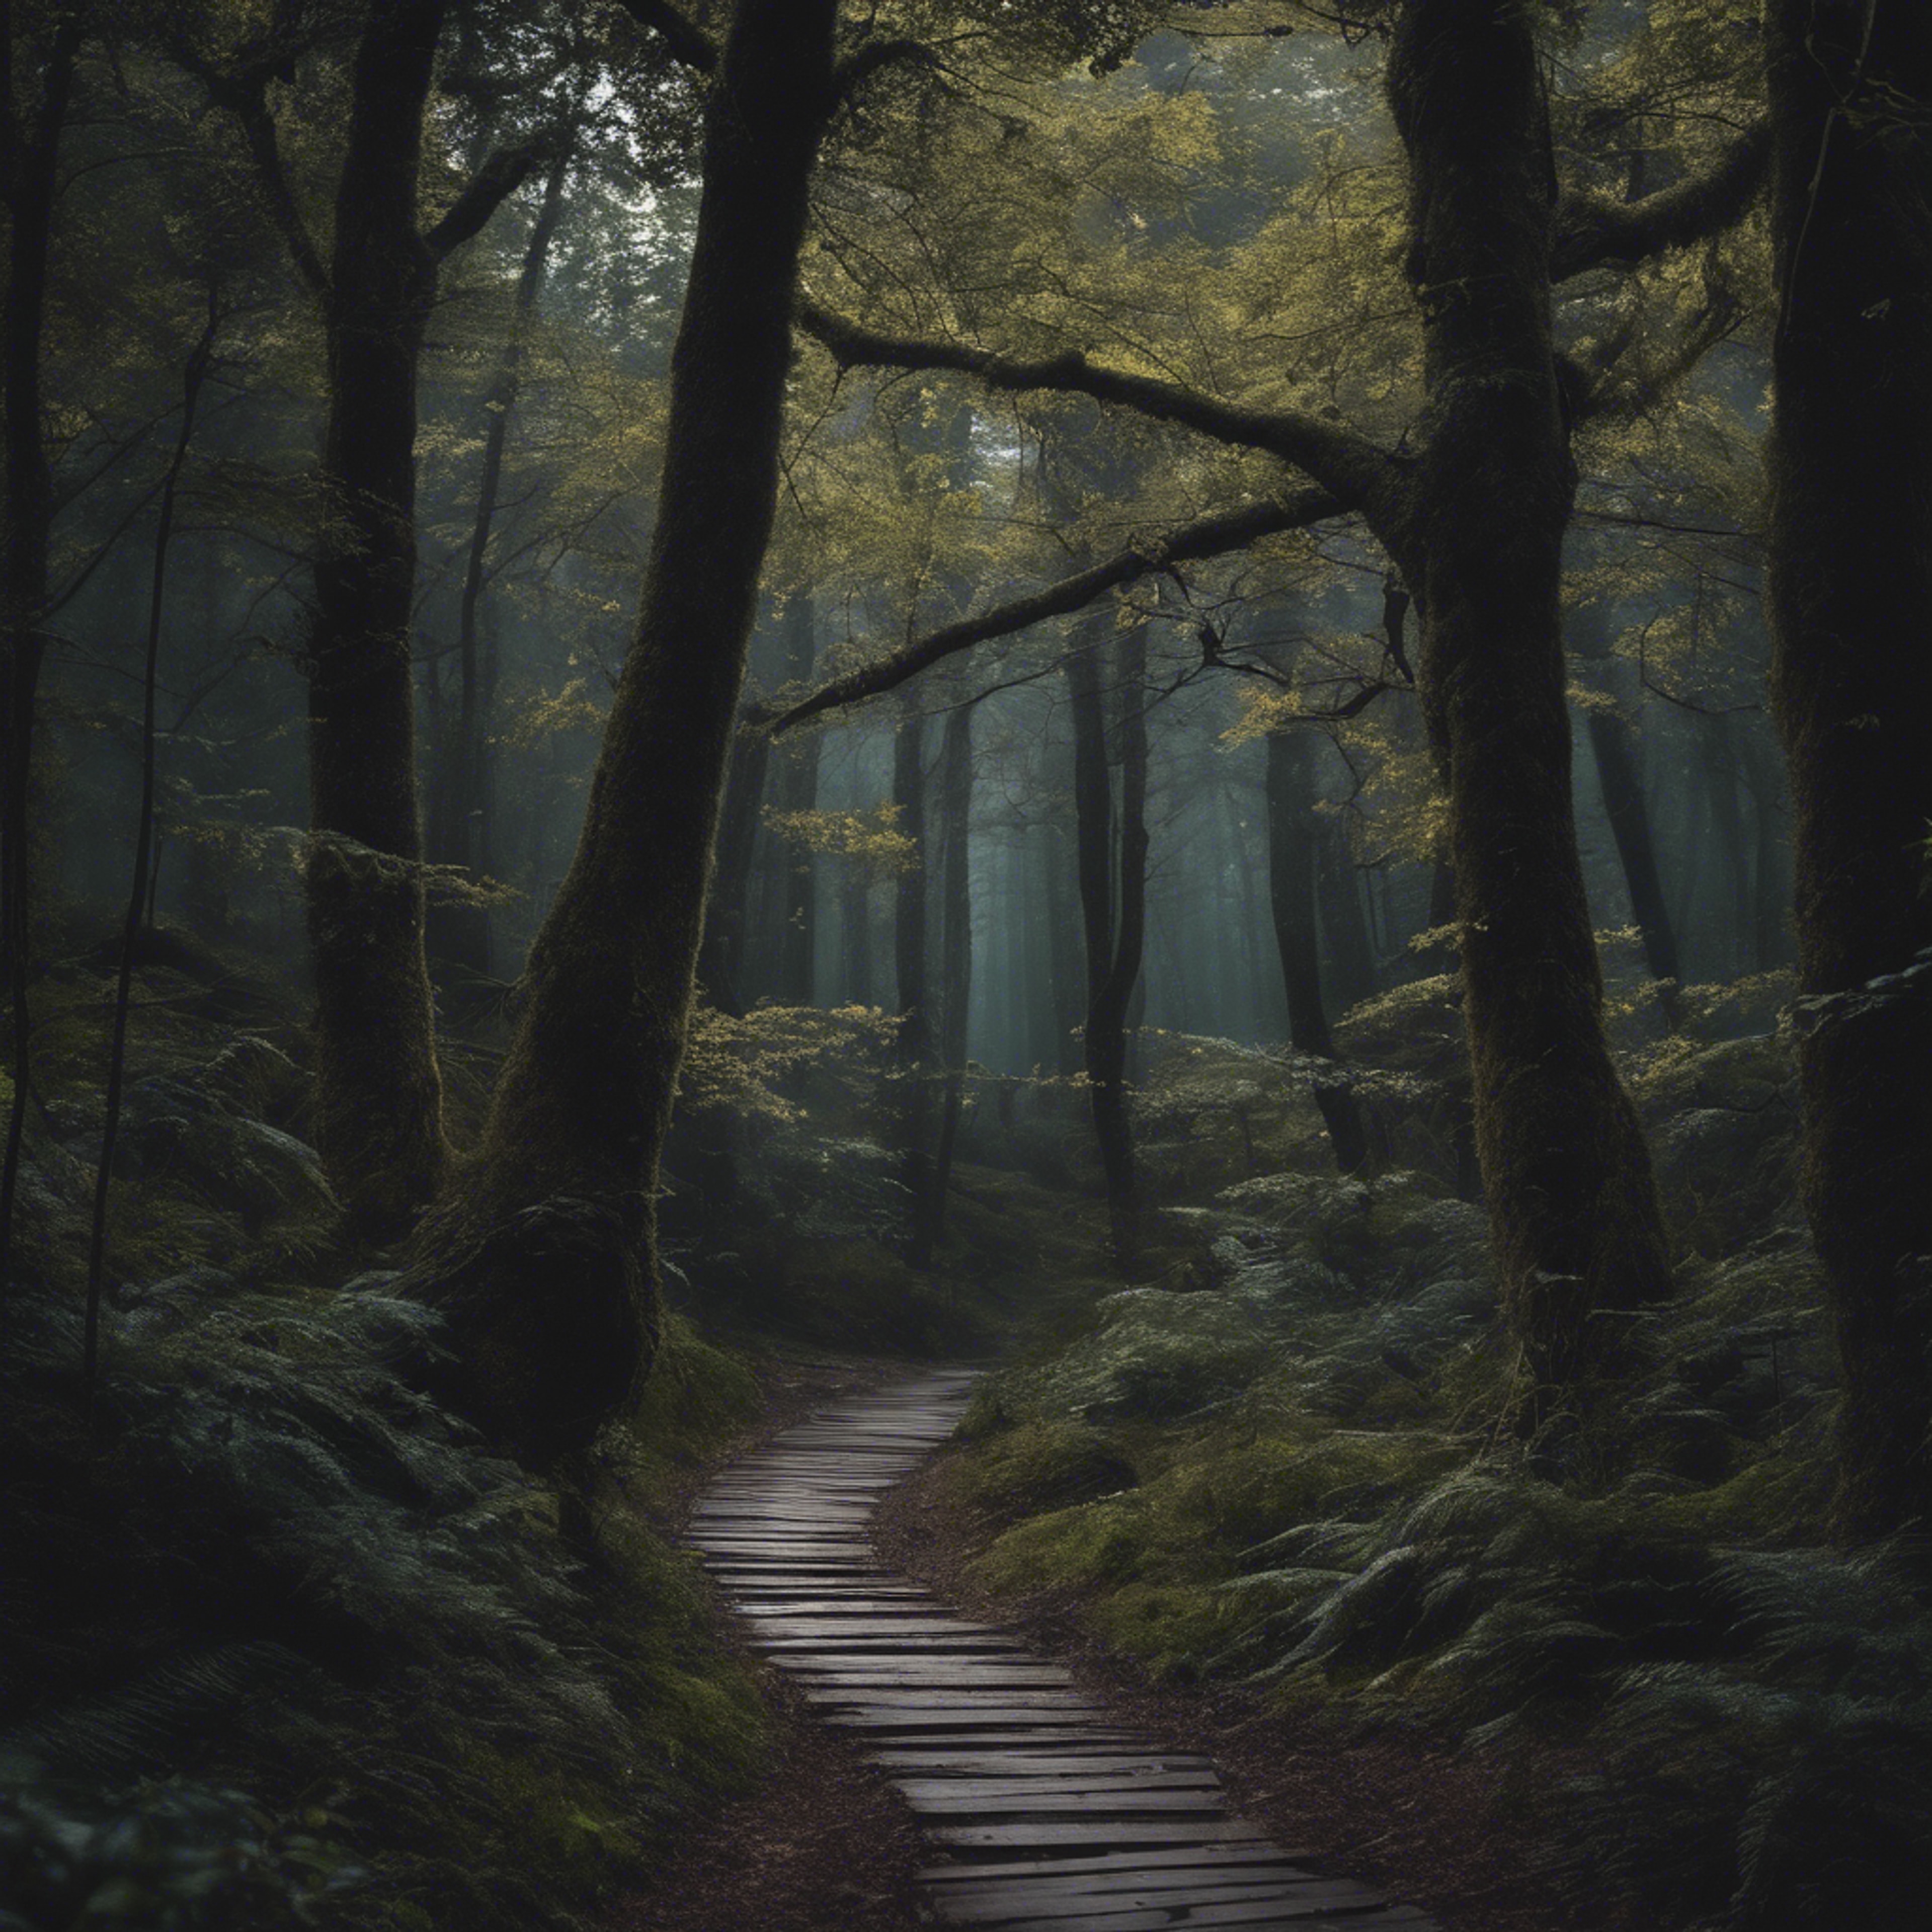 An untraveled path in a dark and mysterious forest Hintergrund[df6a1d860b87482e8c75]